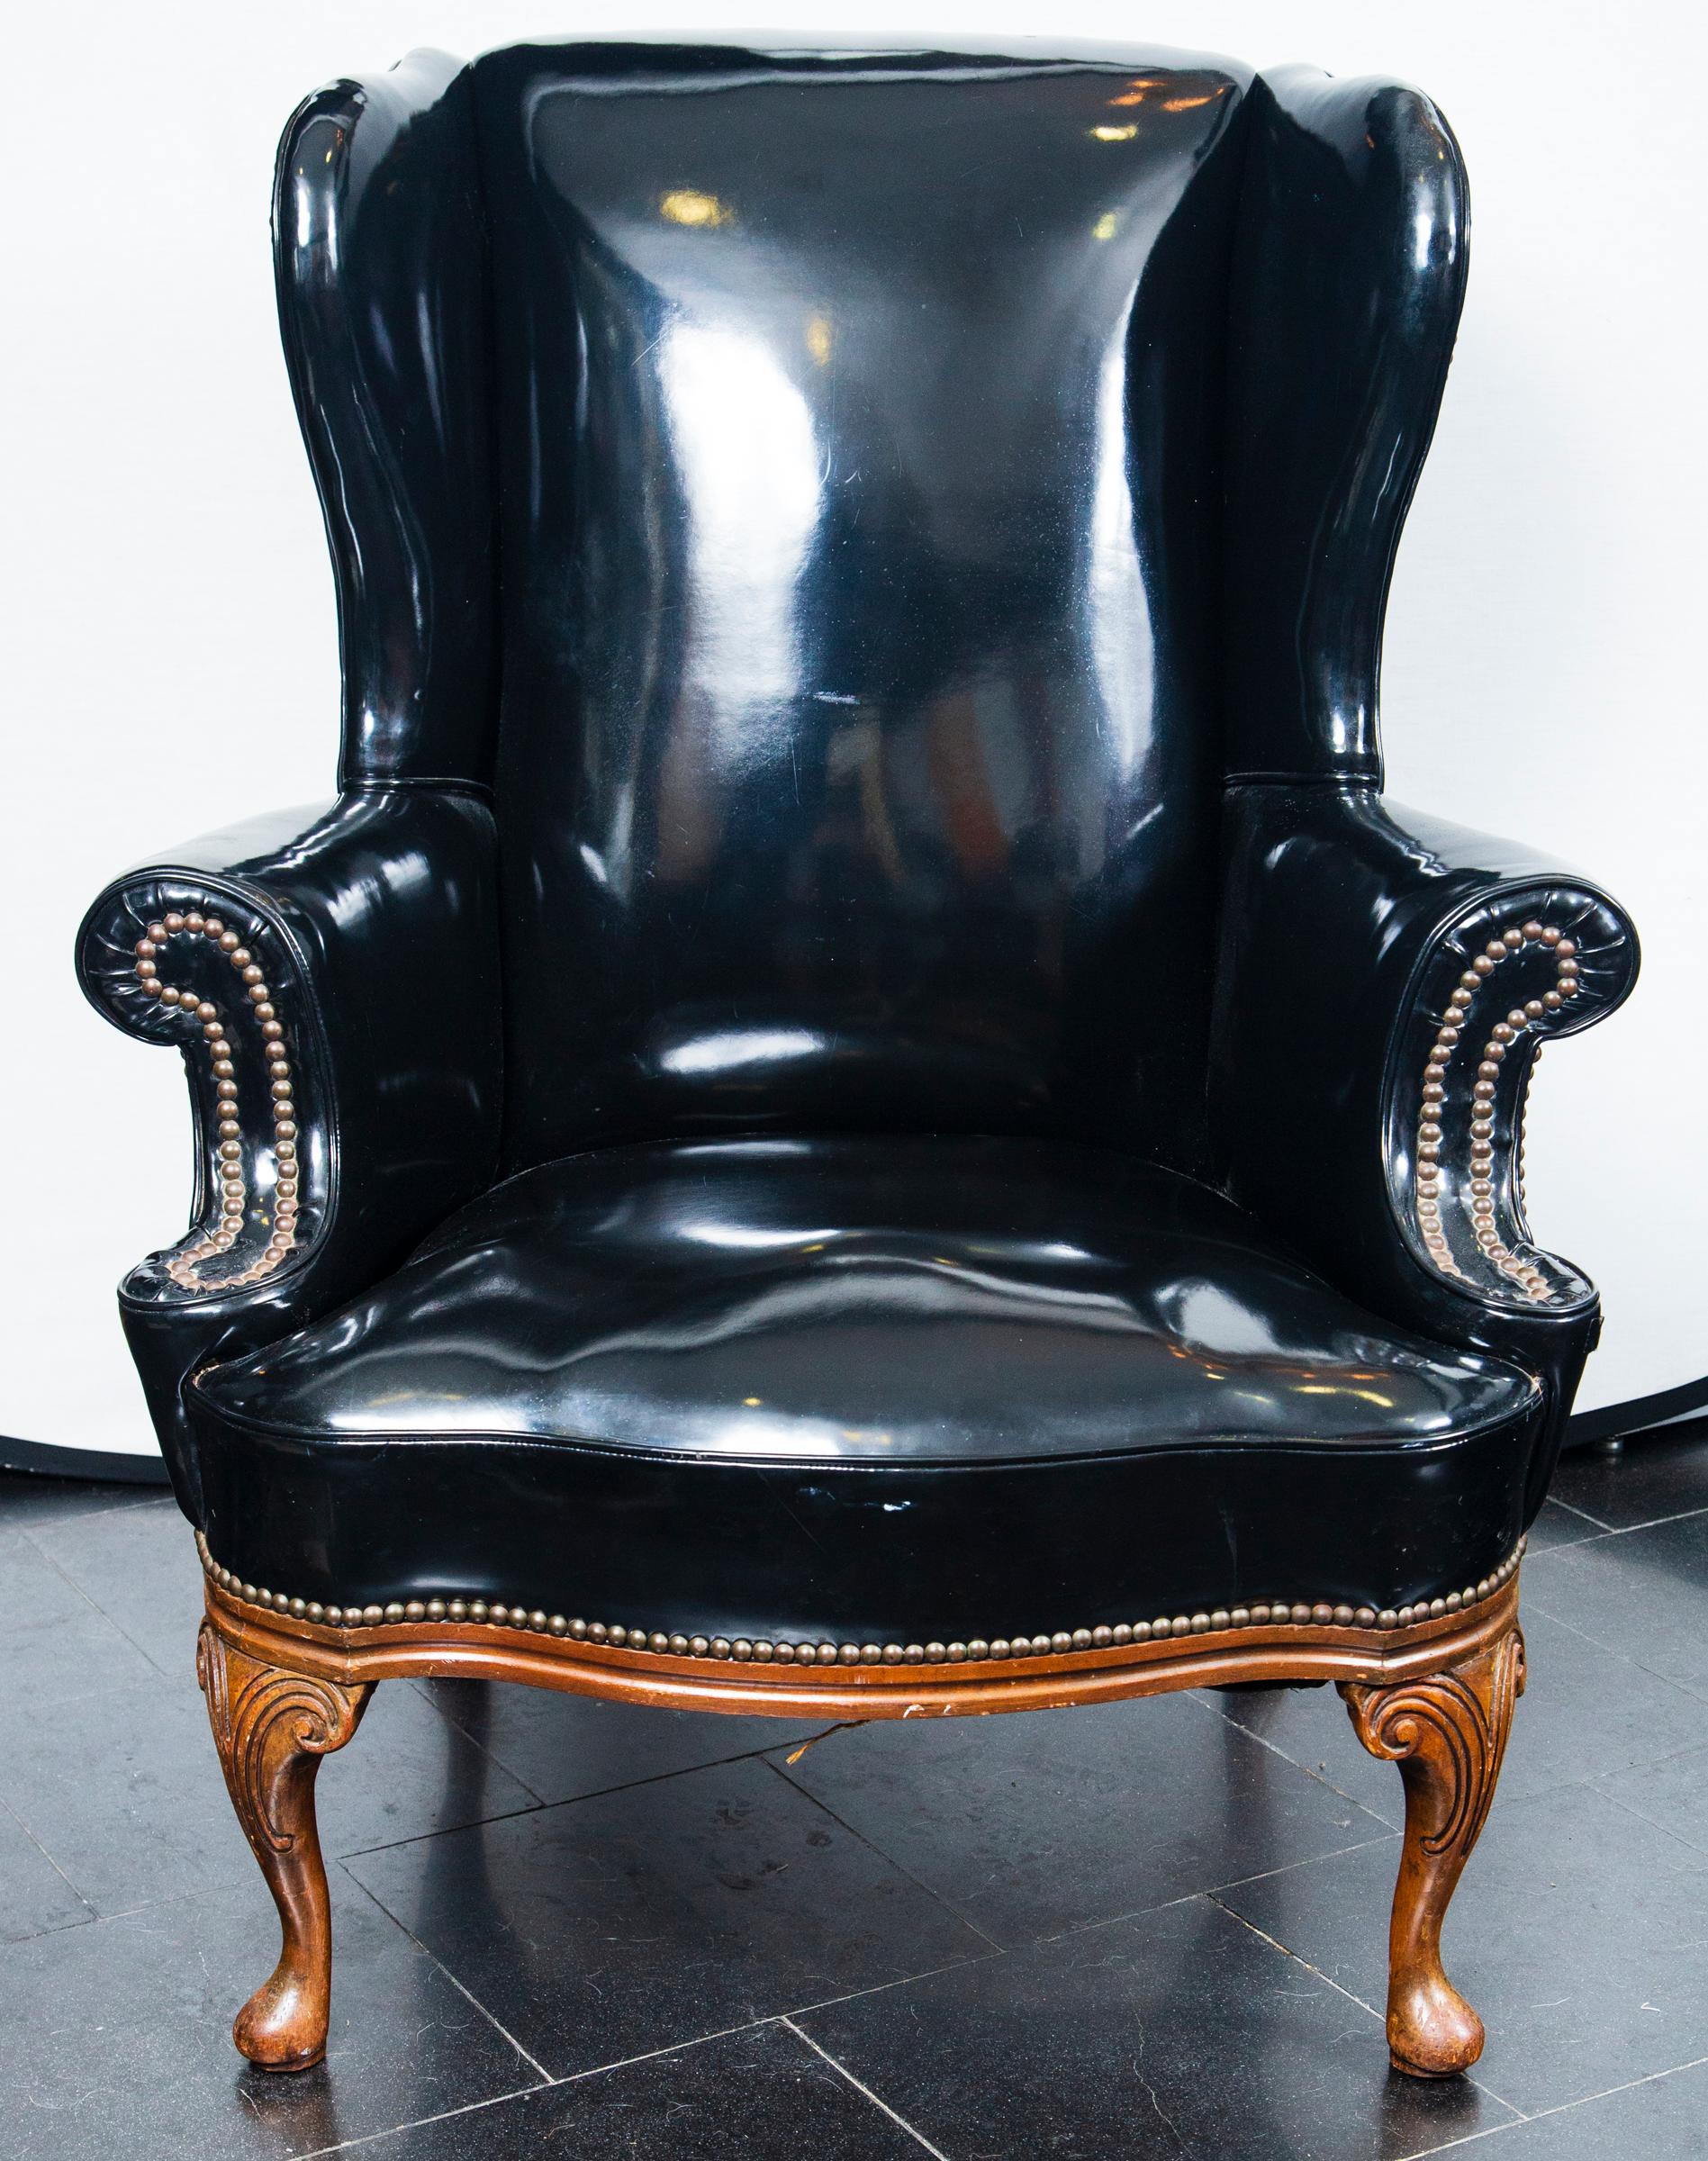 Patent Leather Wing Chair In Excellent Condition For Sale In Stamford, CT